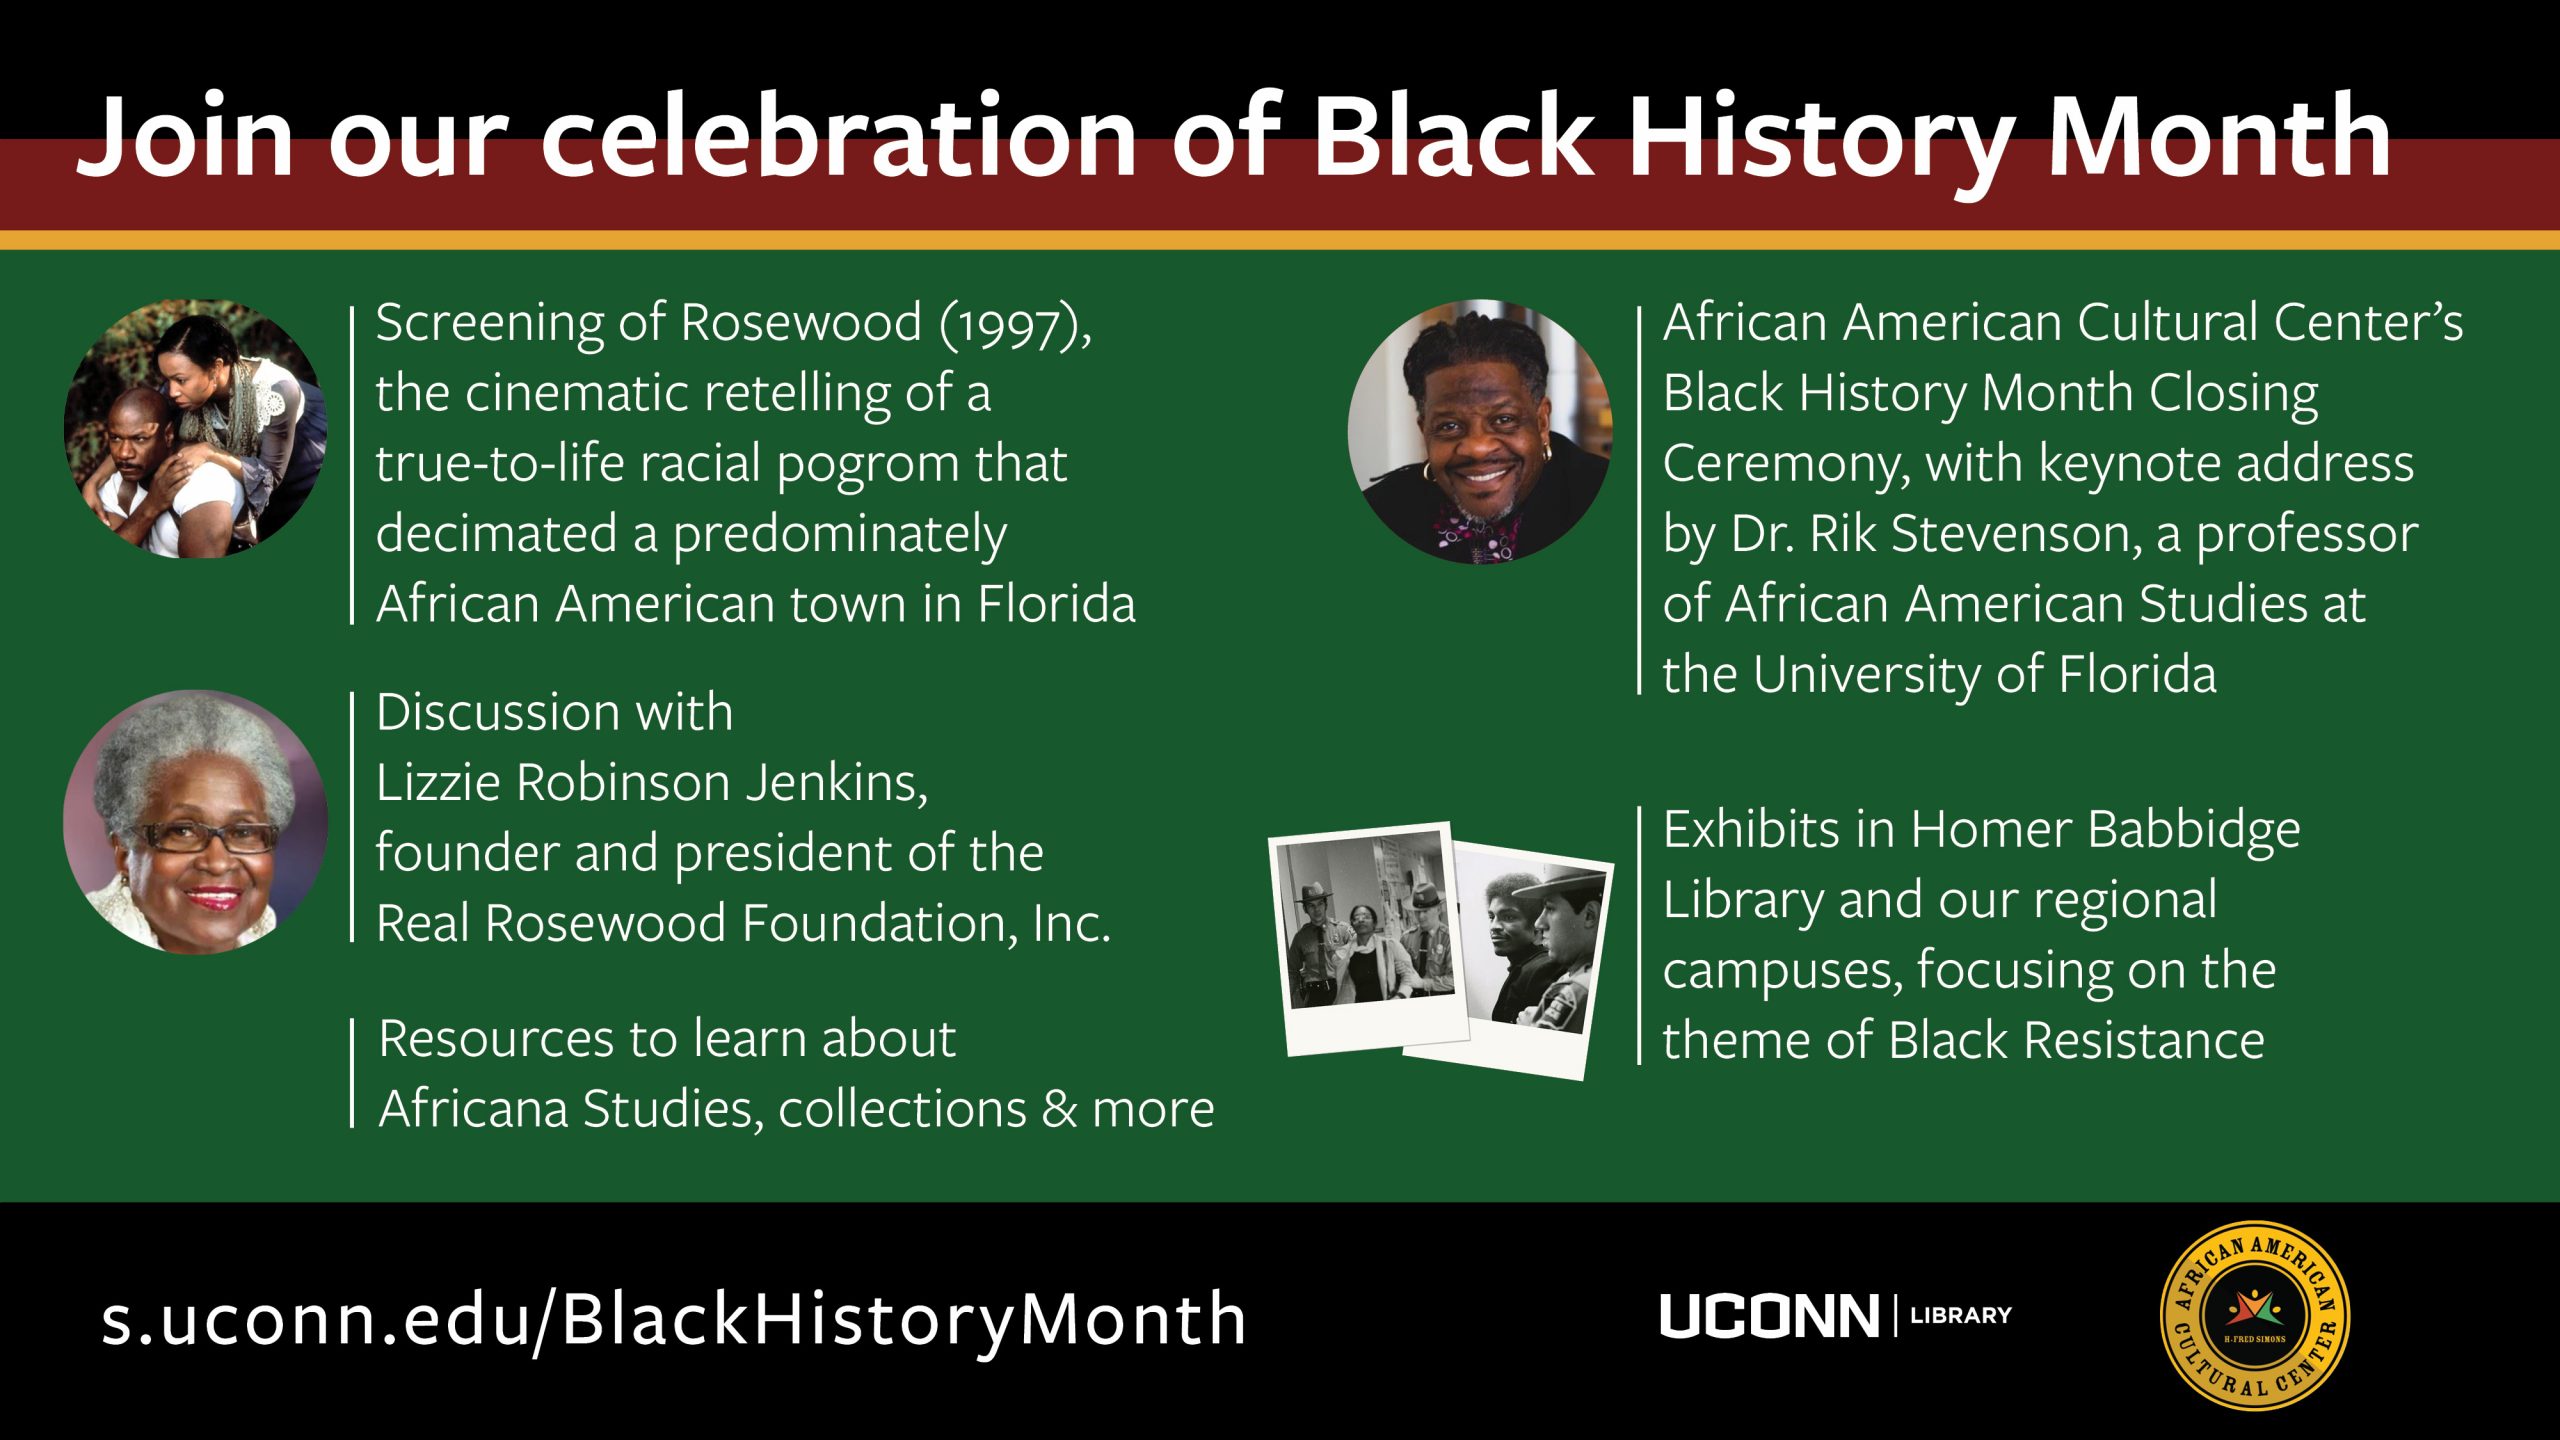 Marketing Image with a background of black, red, yellow and green blocks of color, and the text: Join our celebration of Black History Month. Screening of Rosewood (1997), the cinematic retelling of a true-to-life racial pogrom that decimated a predominately African American town in Florida (next to text is a film still with a black man and black woman holding hands), Discussion with Lizzie Robinson Jenkins, founder and president of the Real Rosewood Foundation, Inc. (next to text is an image of Lizzie Robinson Jenkins, she is a black woman with gray hair and black rimmed glasses, she is smiling). African American Cultural Center’s Black History Month Closing Ceremony, with keynote address by Dr. Rik Stevenson, a professor of African American Studies at the University of Florida (next to text is image of Dr. Rik Stevenson, he is a black man with black hair, he is smiling). Exhibits in Homer Babbidge Library and our regional campuses, focusing on the theme of Black Resistance (next to the text are two historic photographs of black students being arrested during Wilbur Cross Library protest, April 23, 1974). Resources to learn about Africana Studies, collections & more. s.uconn.edu/BlackHistoryMonth